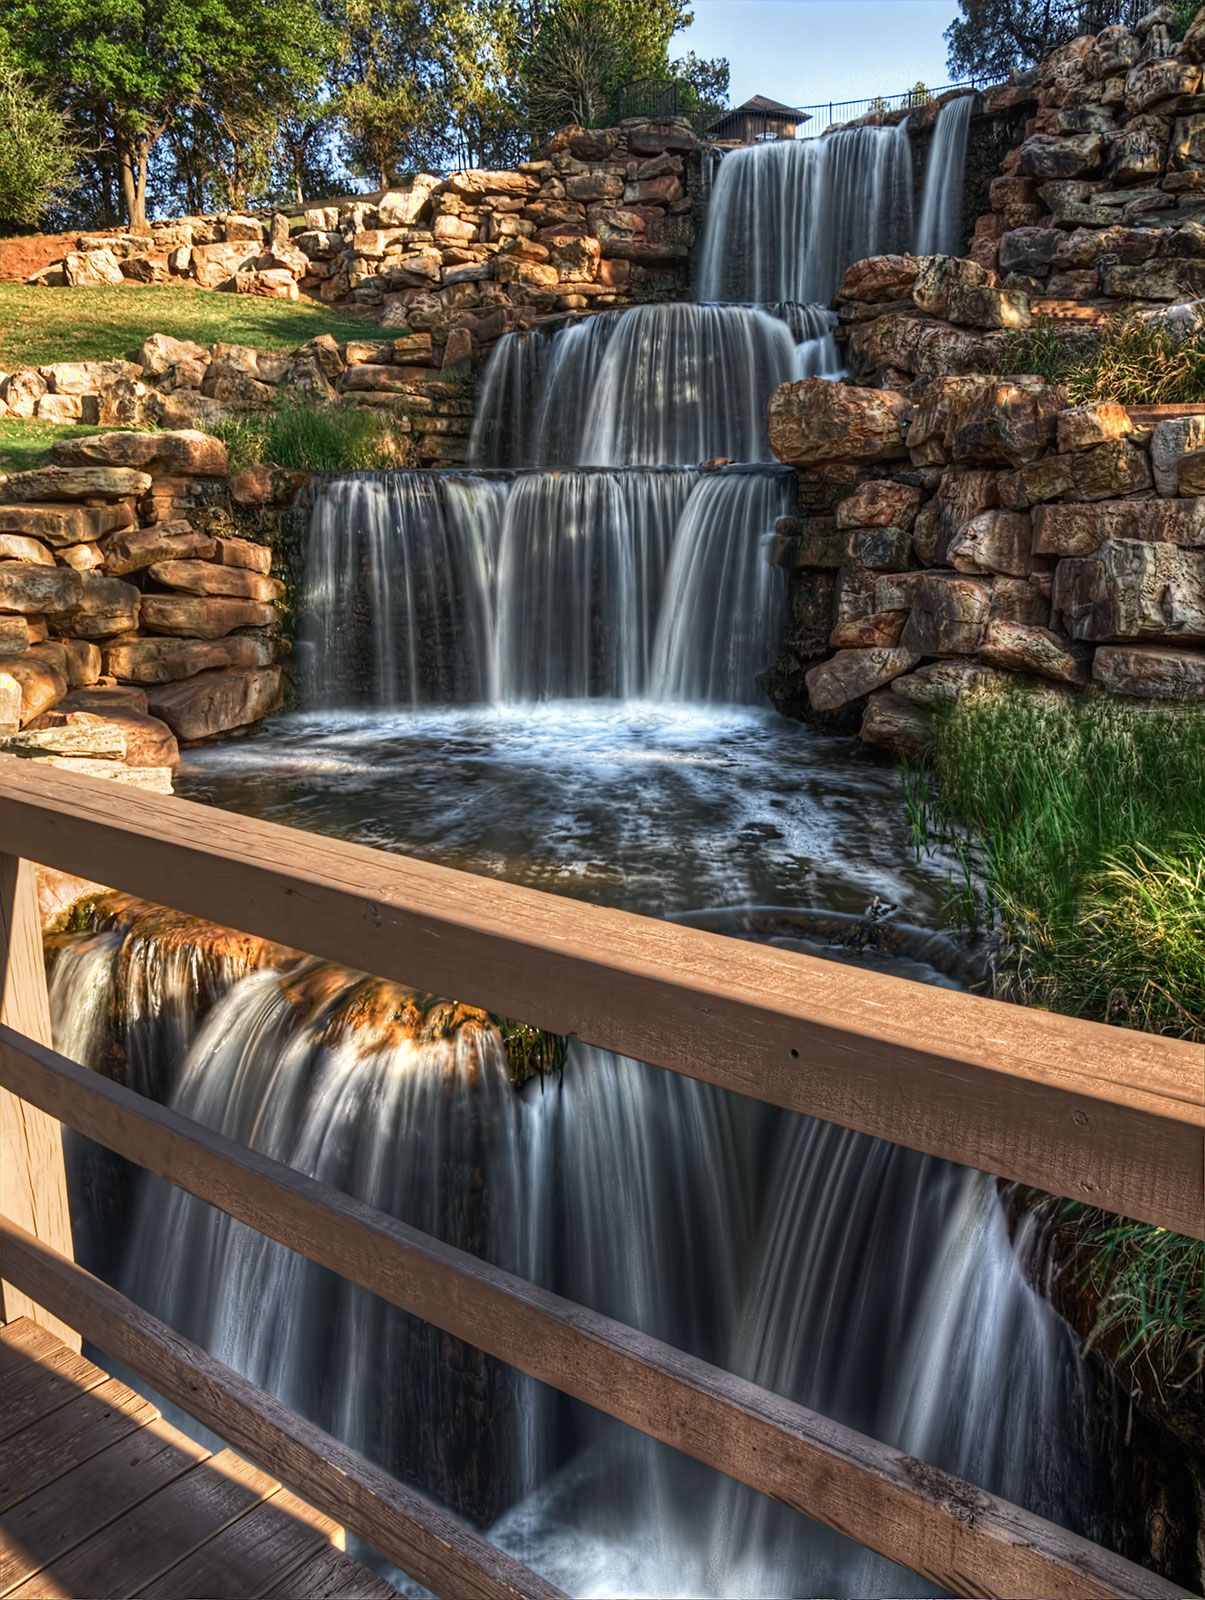 Waterfall Photography Tips | Everyday HDR For next time we go to ...